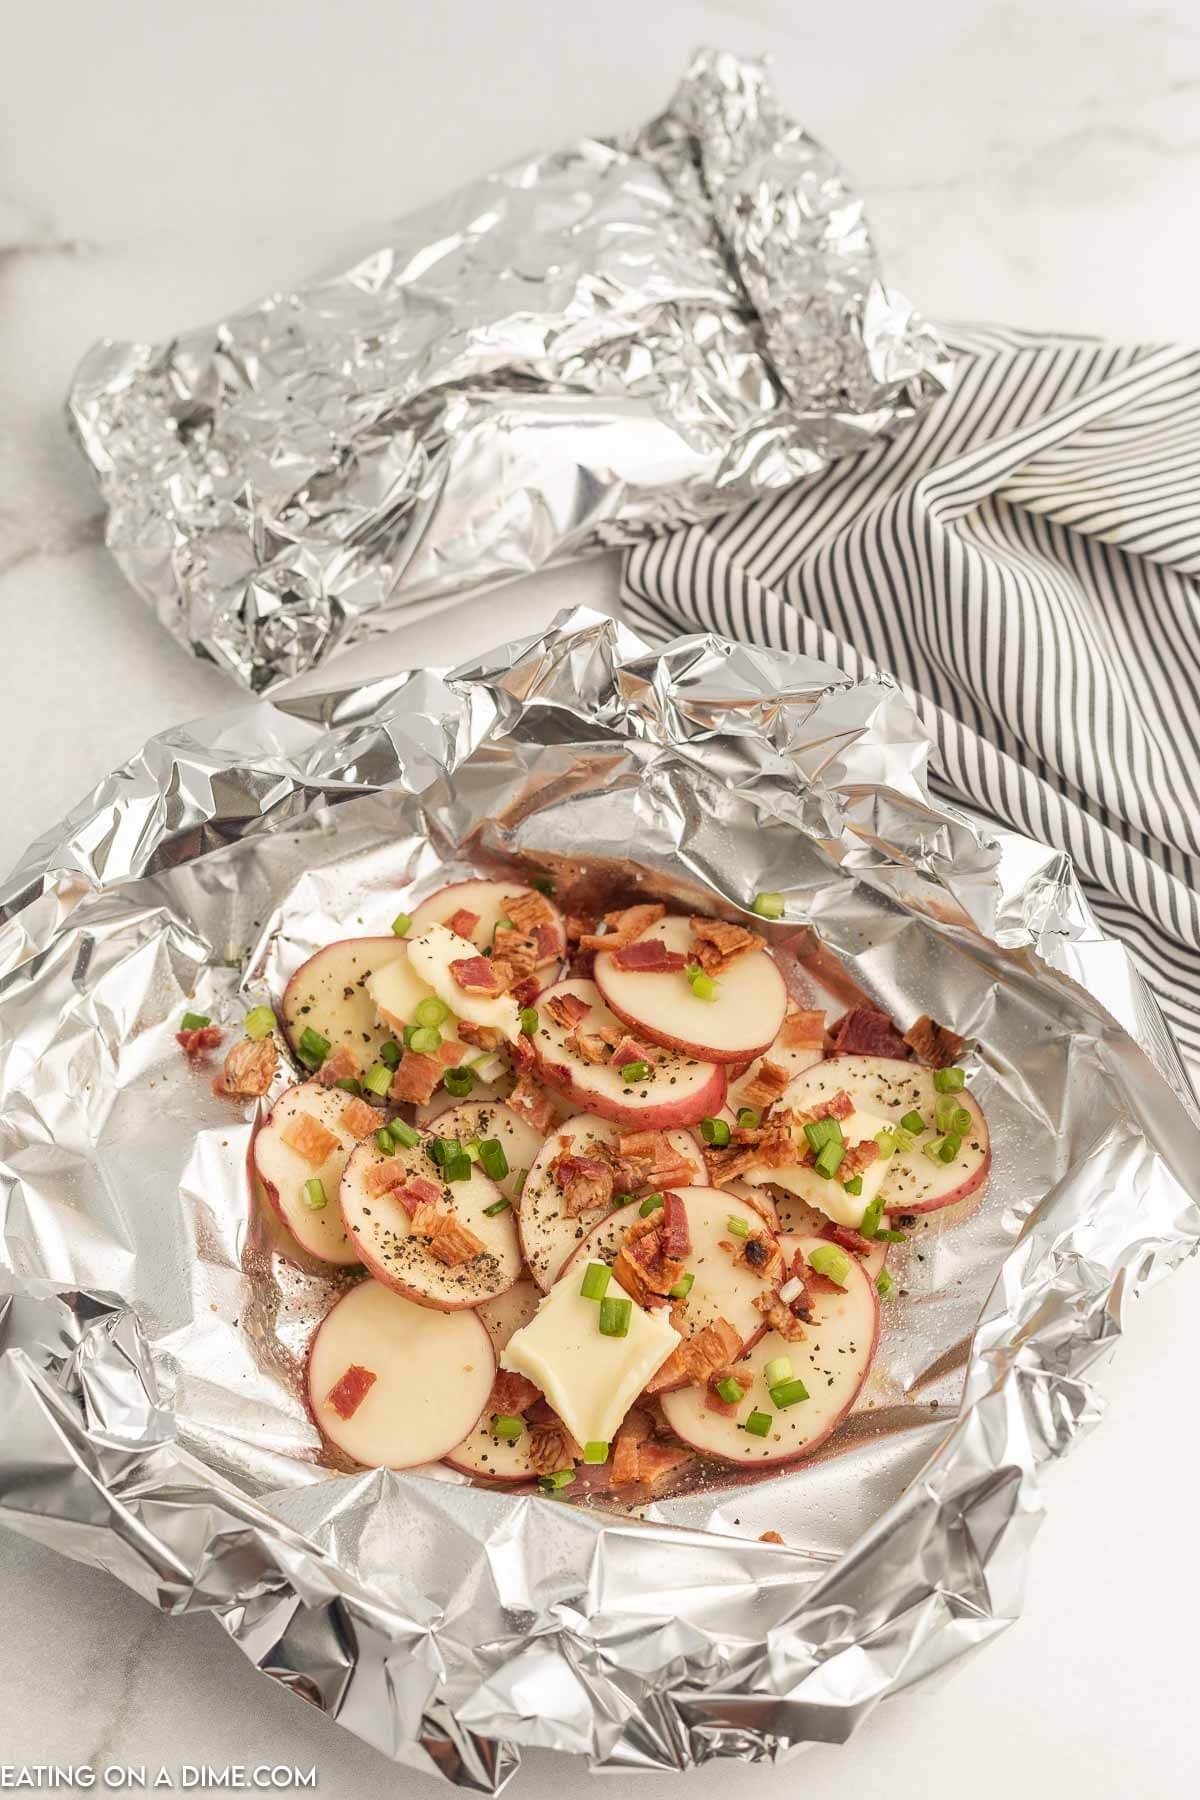 Loading foil with slice potatoes and topping with bacon green onions and seasoning